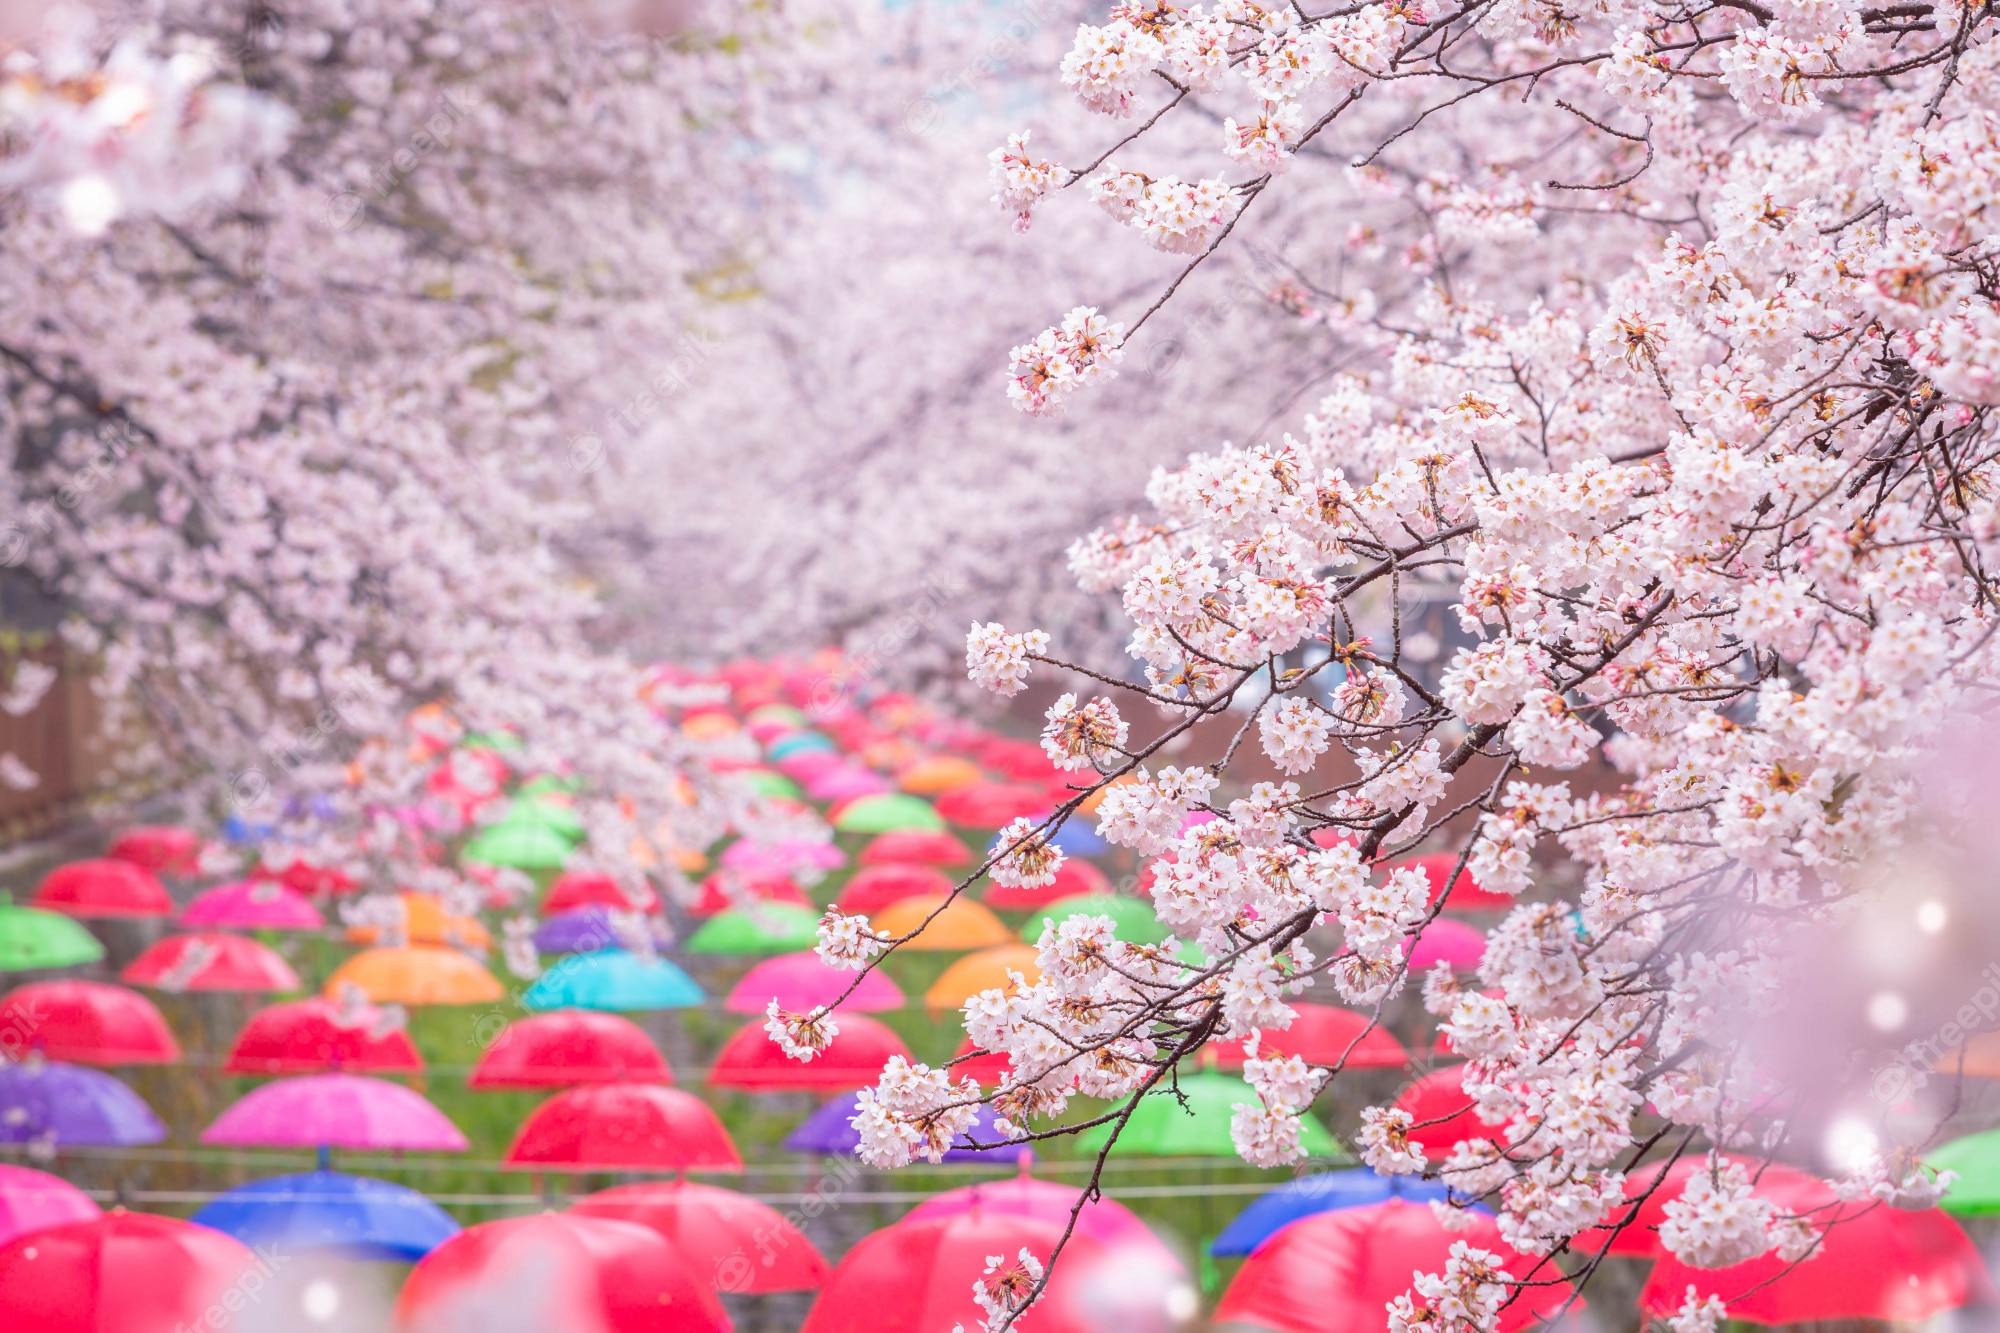 Premium photo cherry blossom in spring in korea is the popular cherry blossom viewing spot jinhae south korea